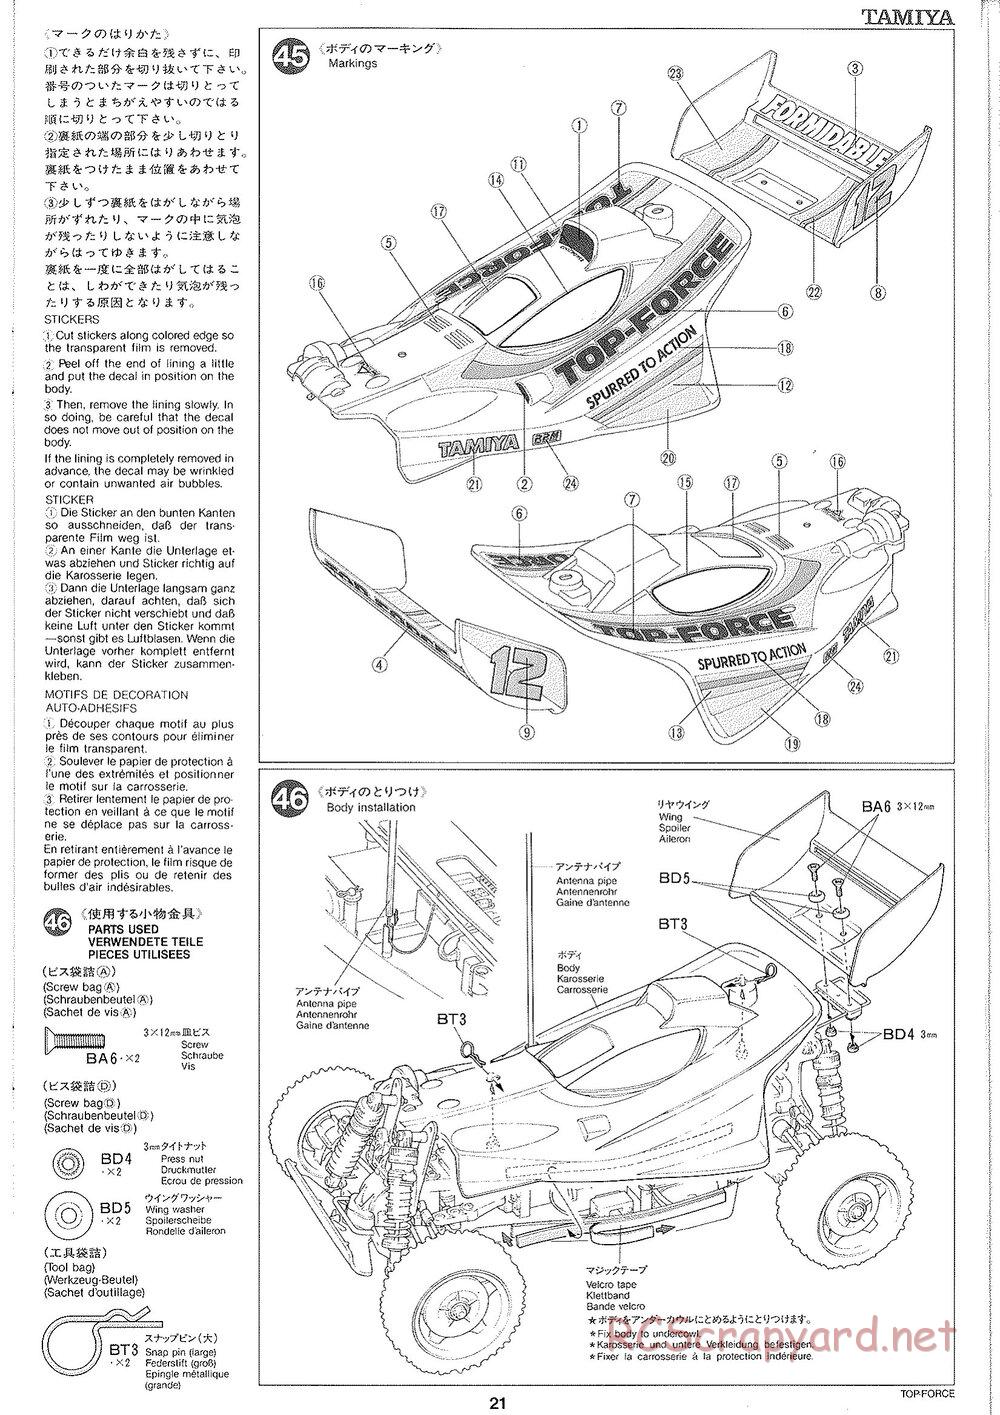 Tamiya - Top Force 2005 - DF-01 Chassis - Manual - Page 21